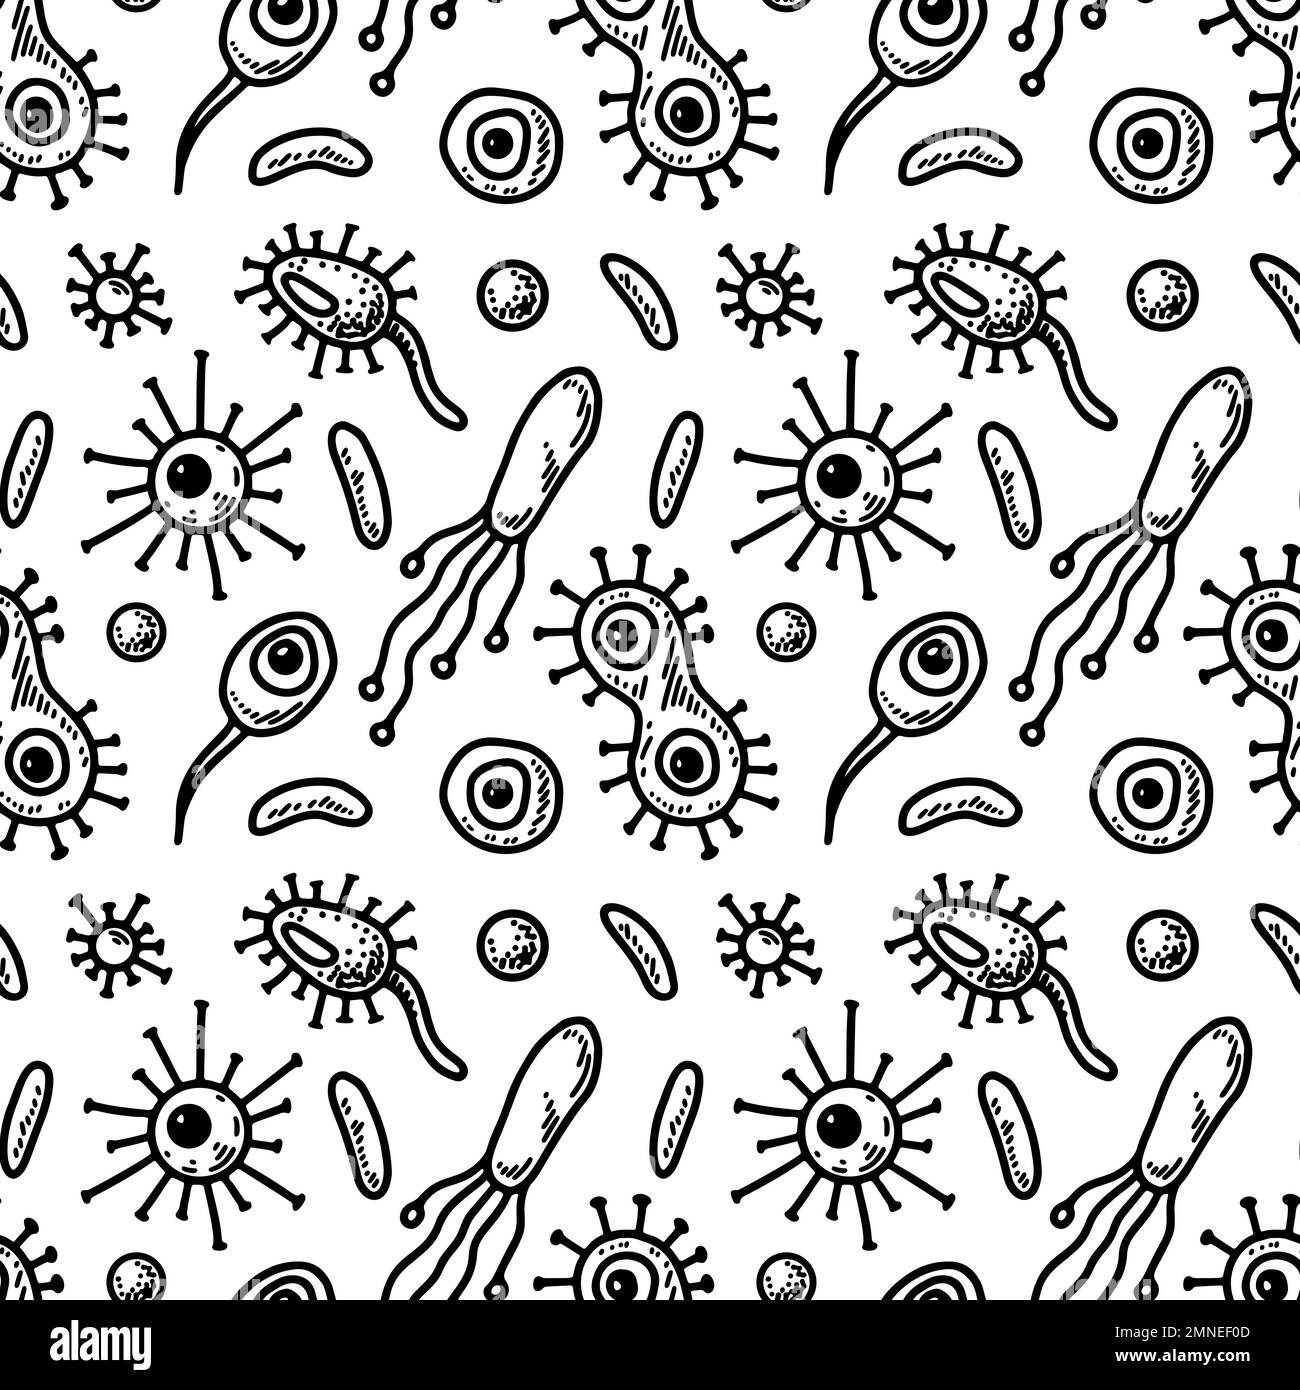 Microbiology seamless pattern. Scientific vector illustration in sketch style Stock Vector